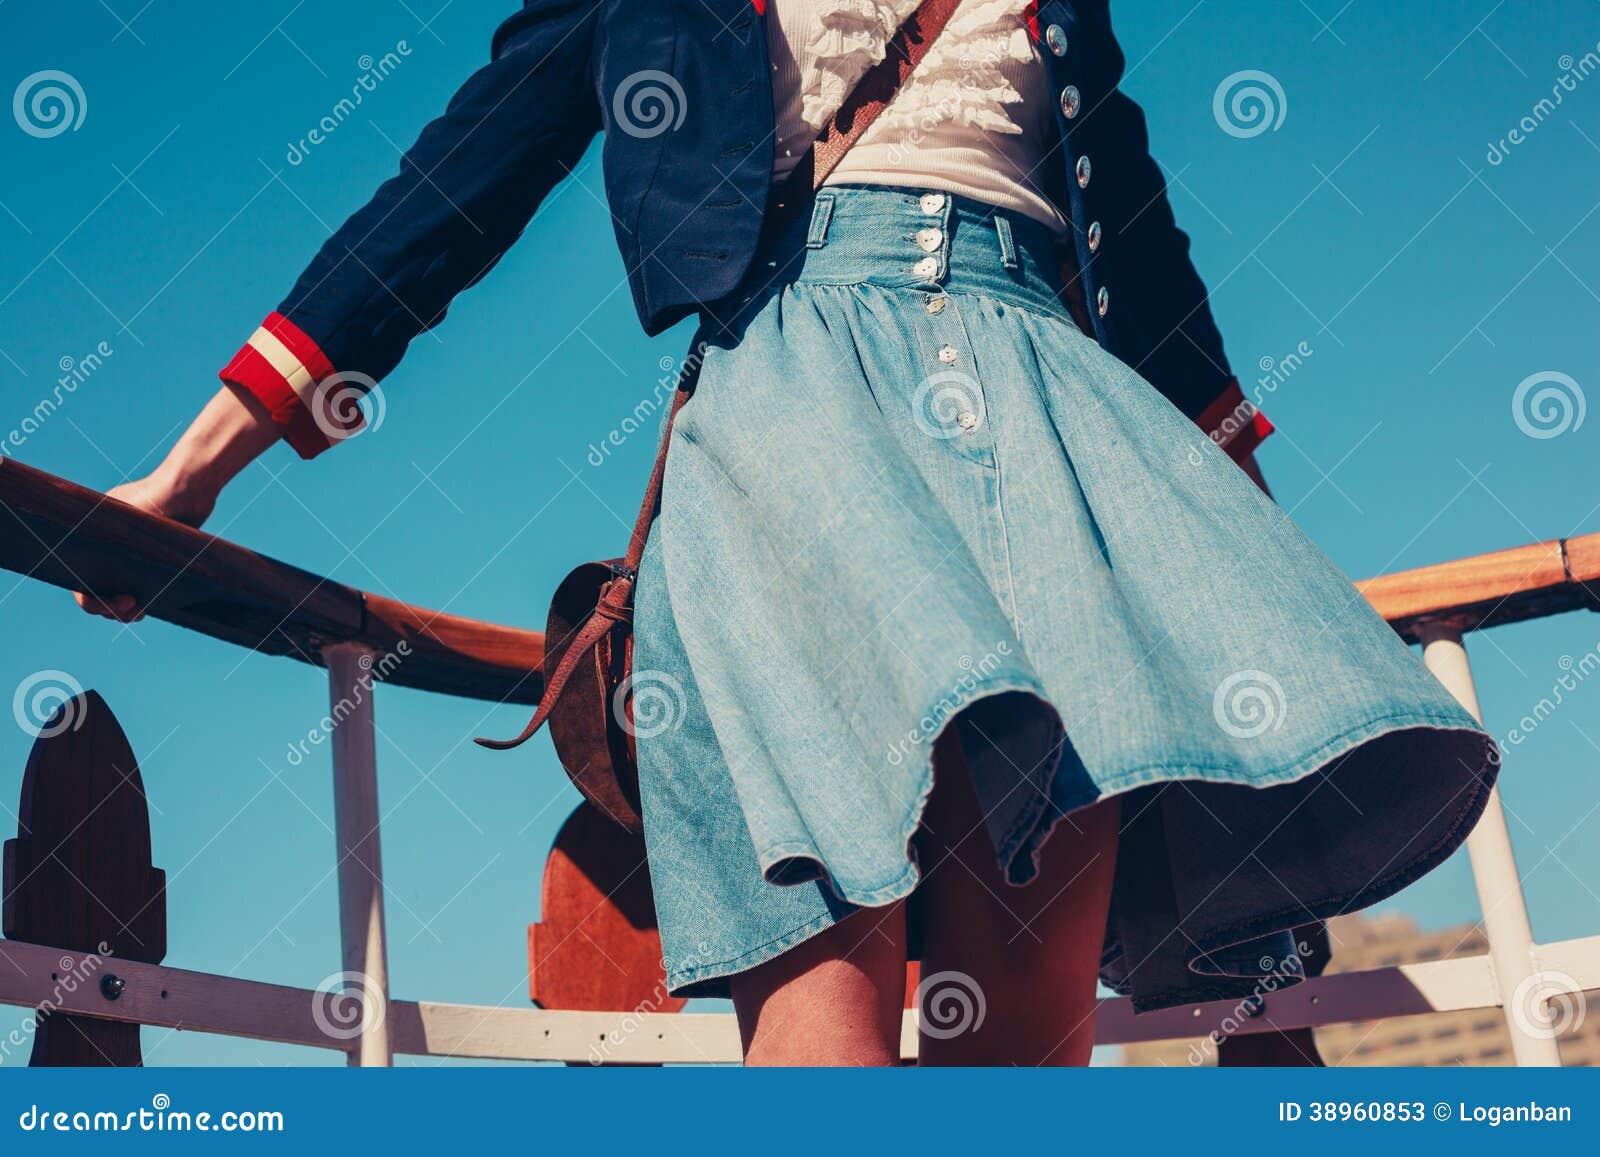 Young Woman On Deck Of Ship With Skirt Blowing Stock Image 